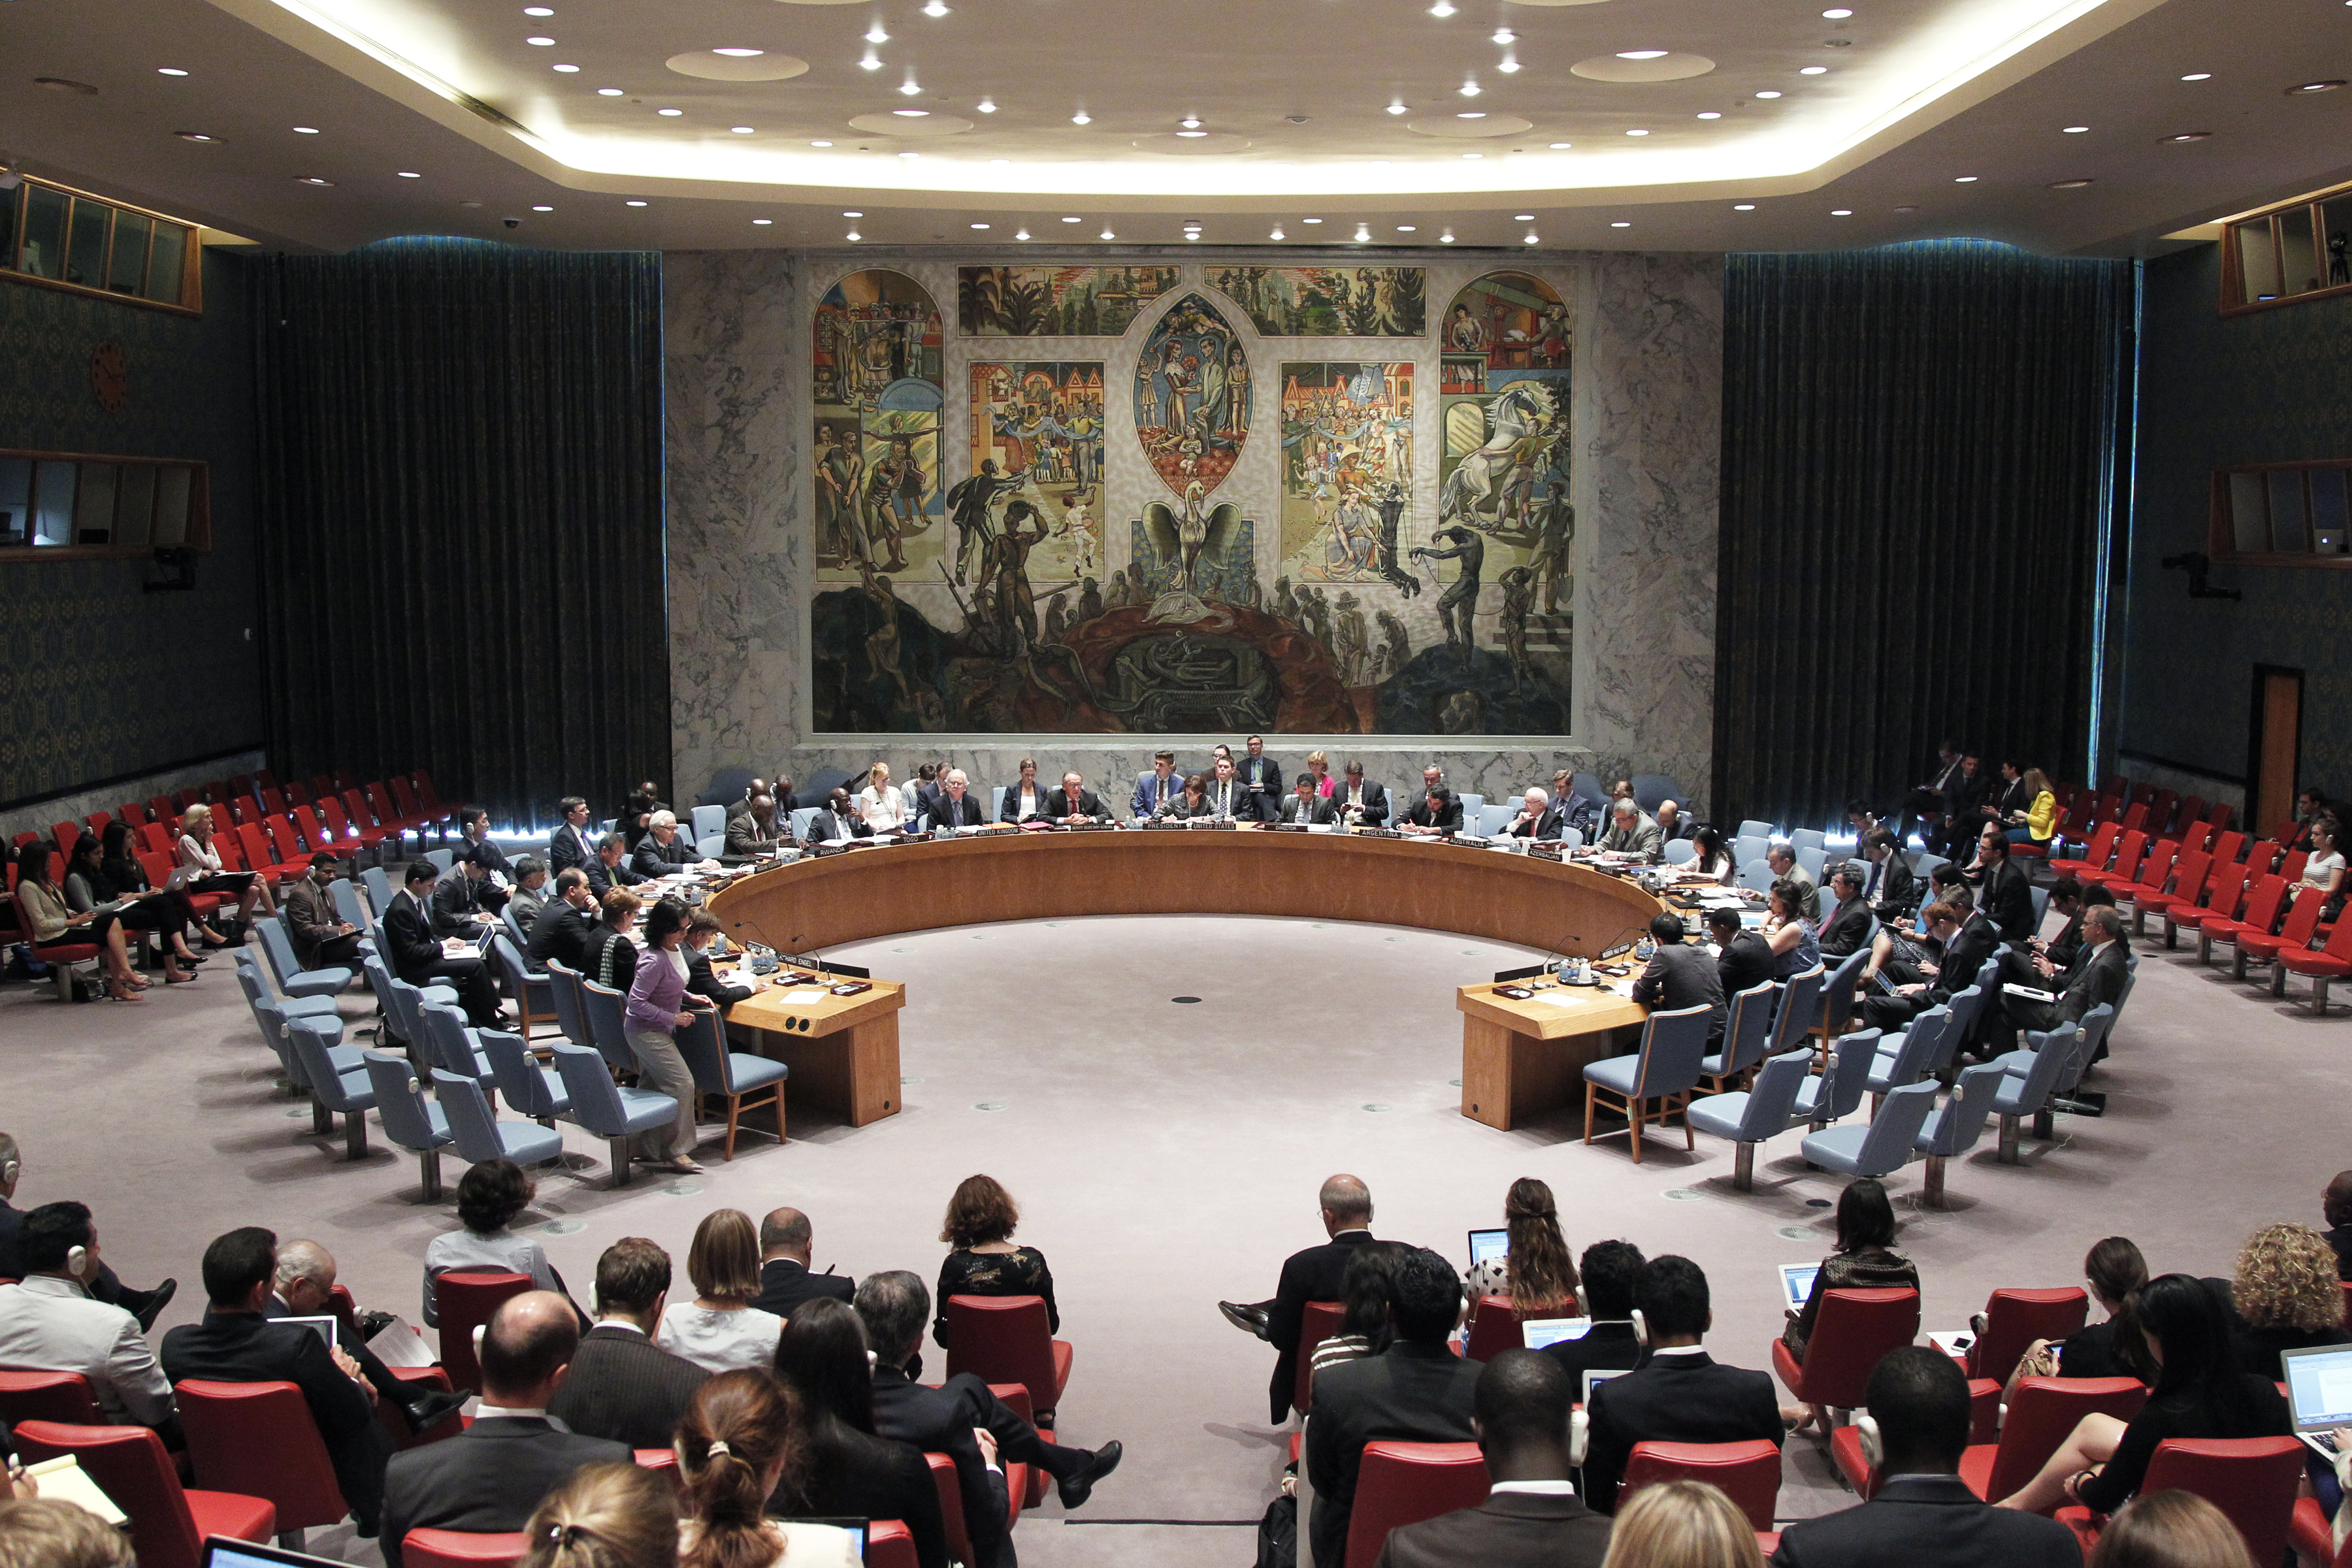 List of members of the United Nations Security Council